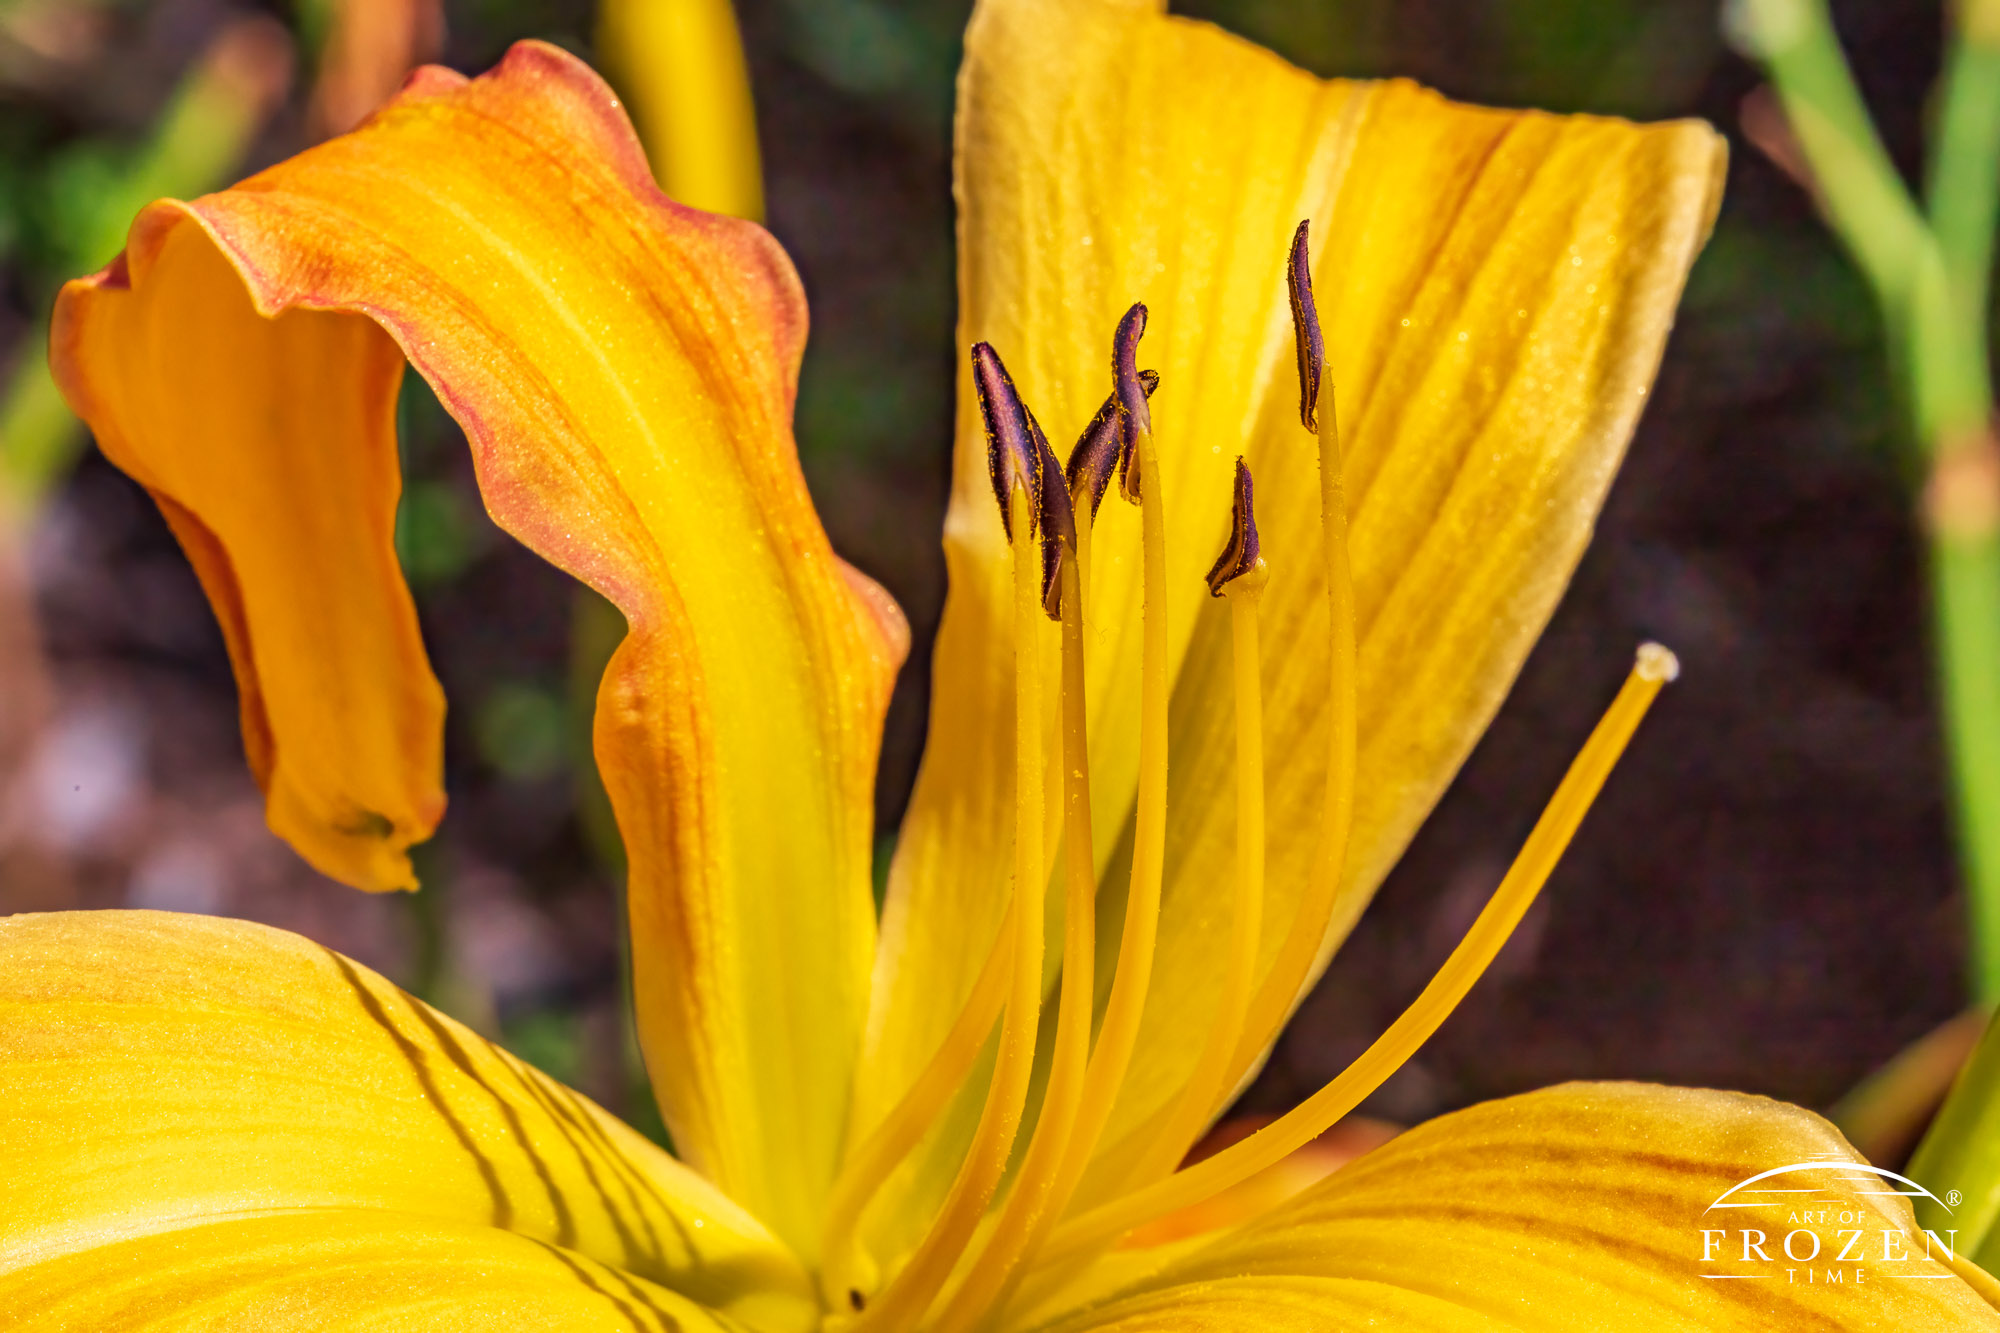 Mary Todd Daylily (Hemerocallis) which features yellow petals, yellow pistil and yellow stamen.